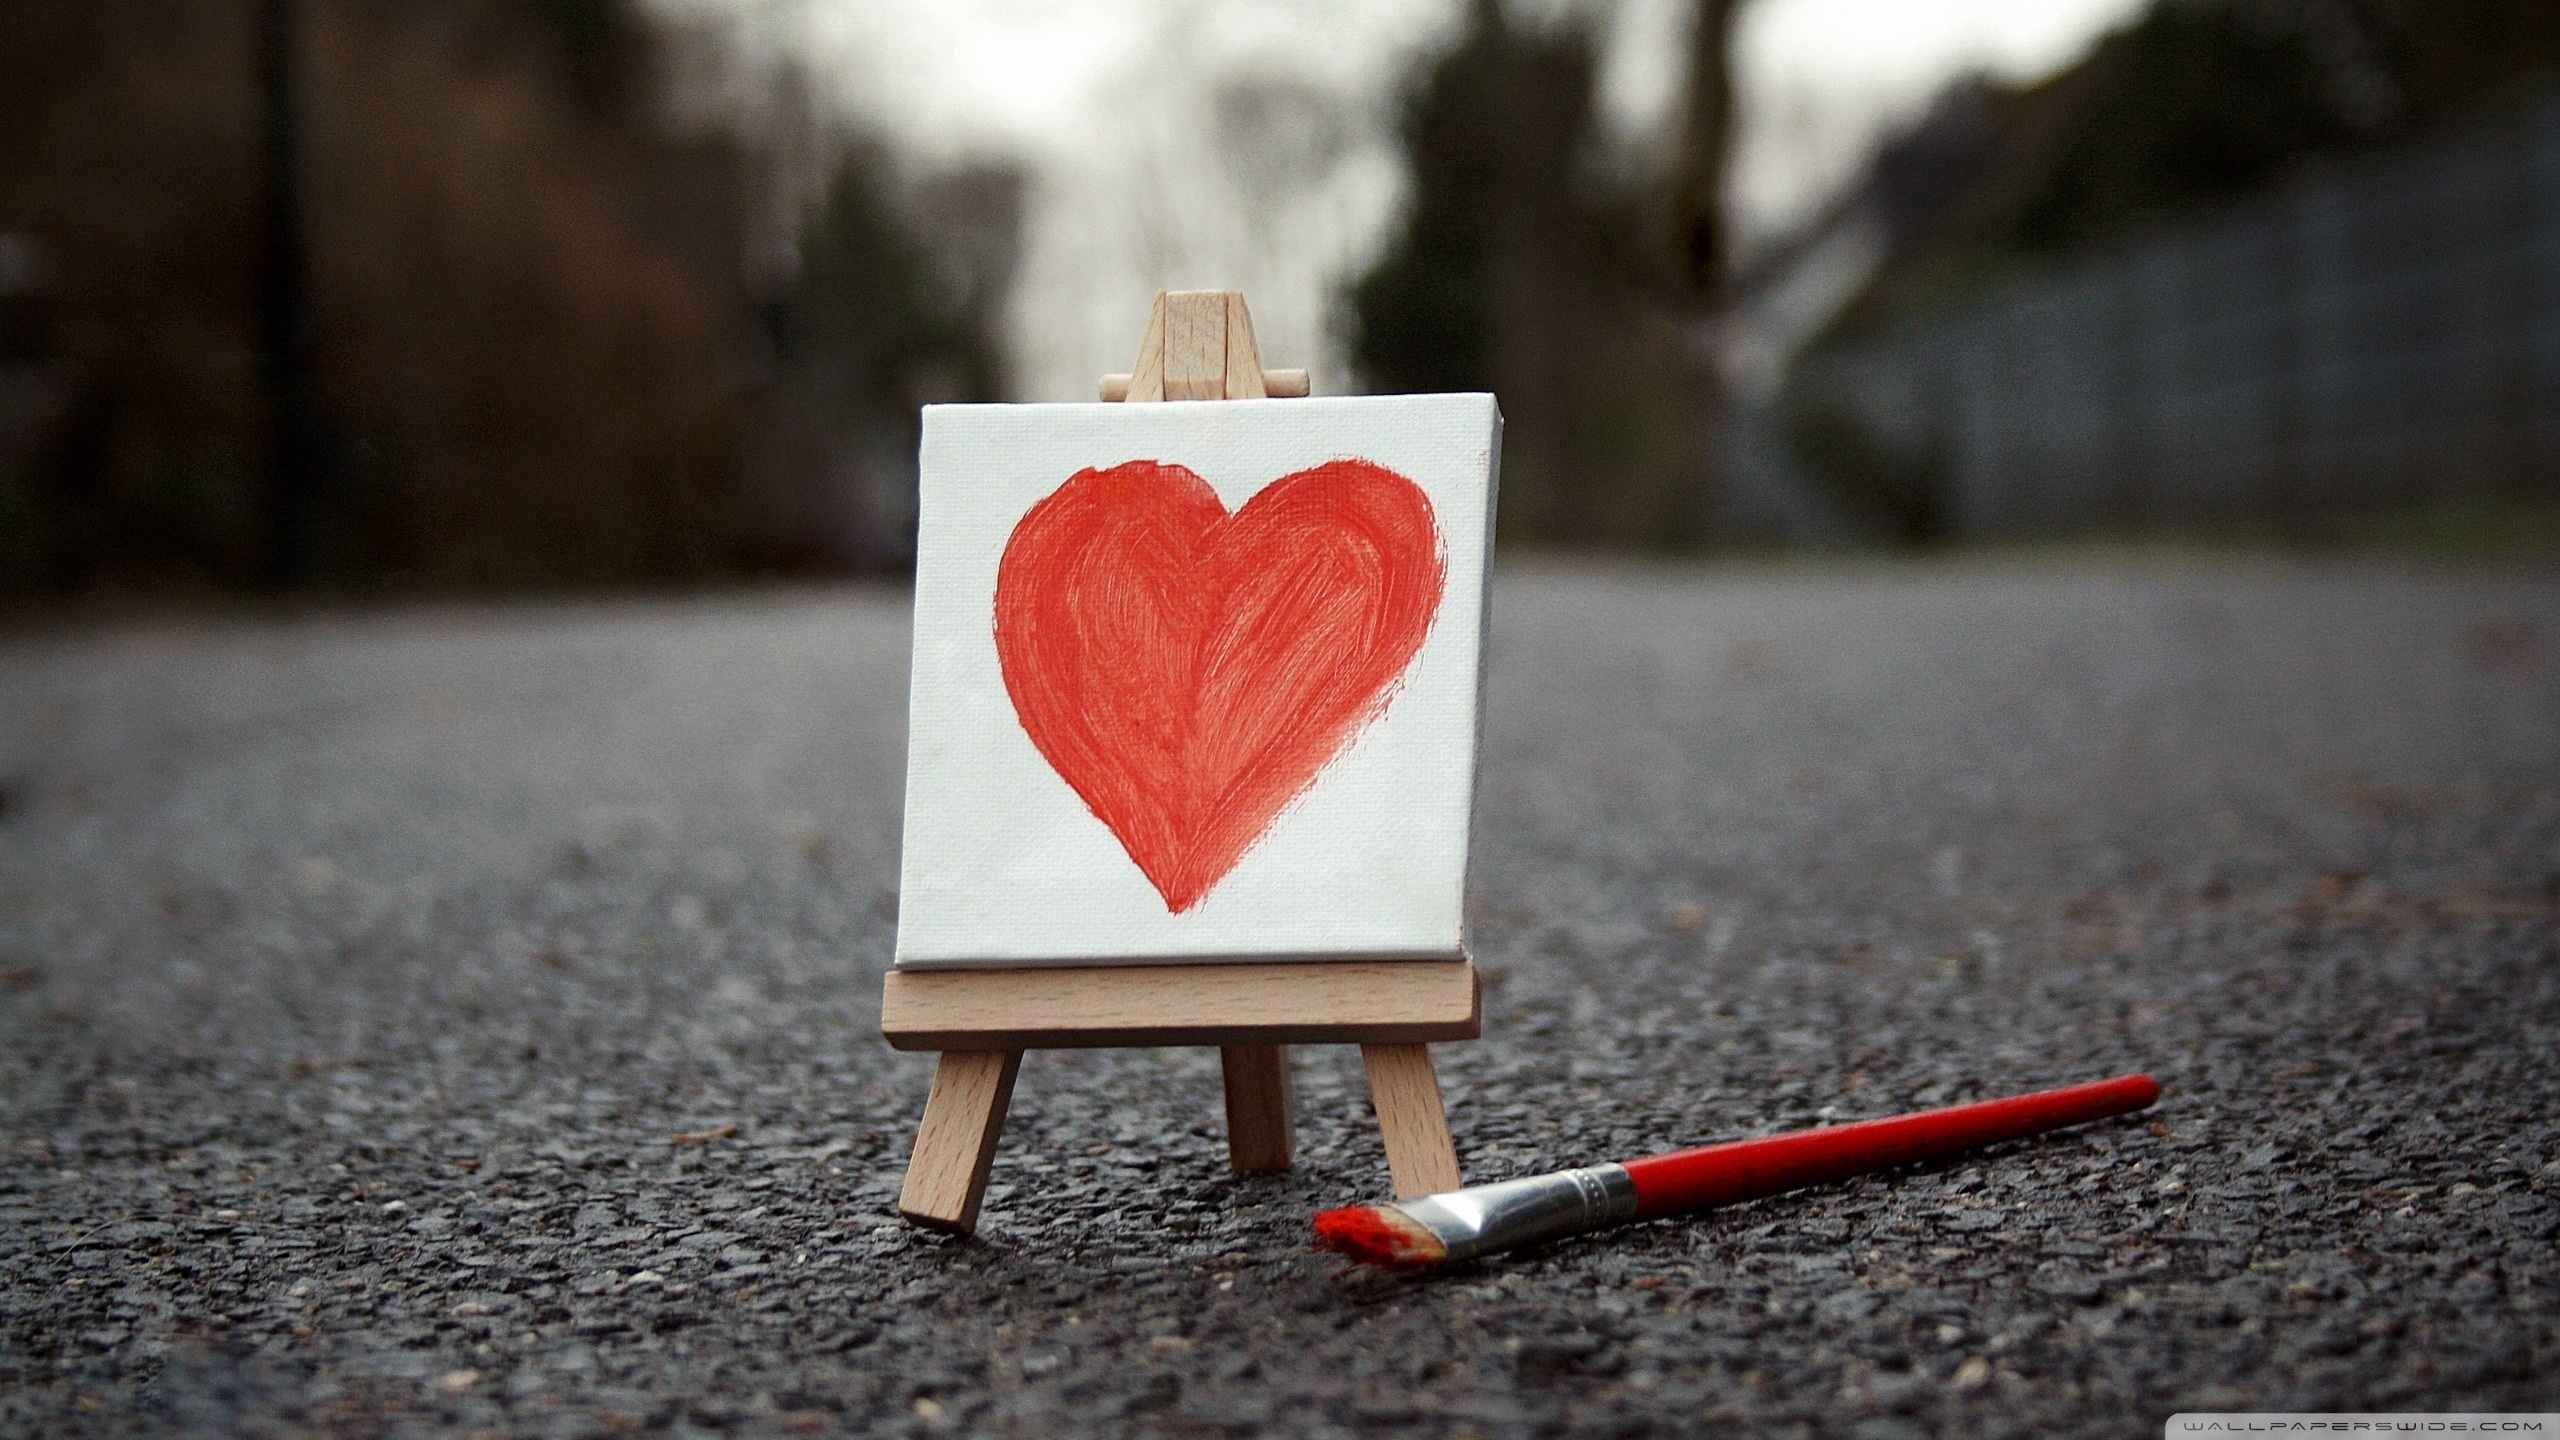 Love Painting Images Download - HD Wallpaper 